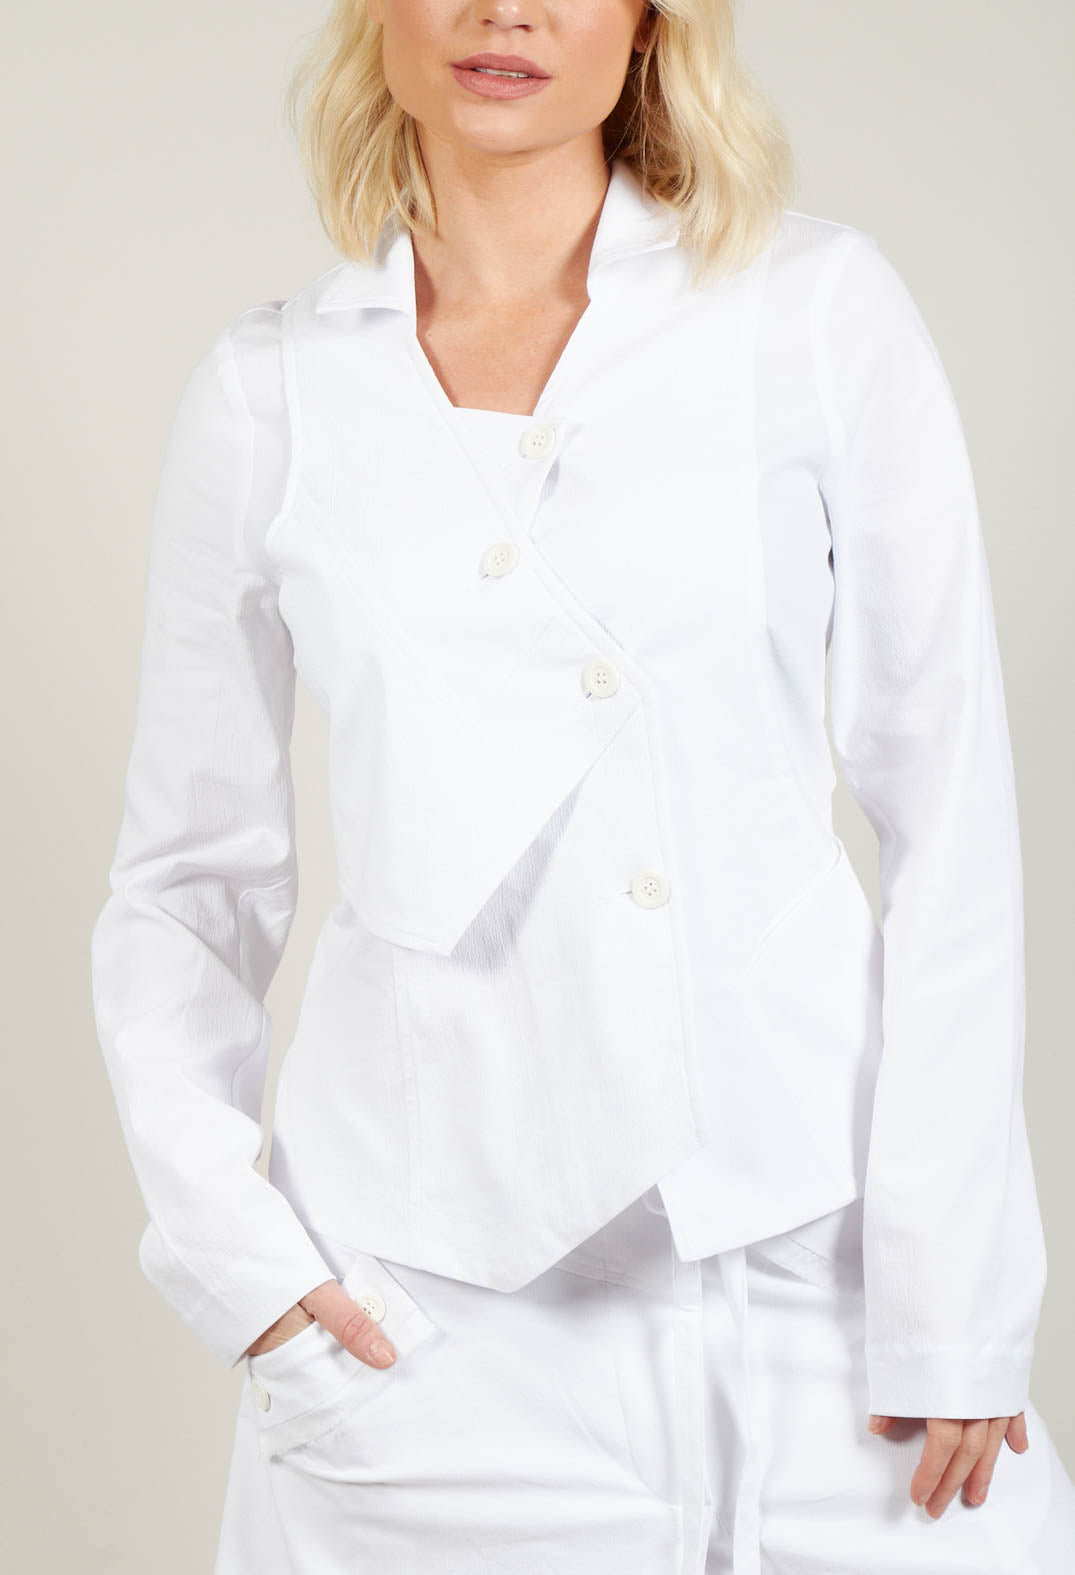 Dissected Jacket in White